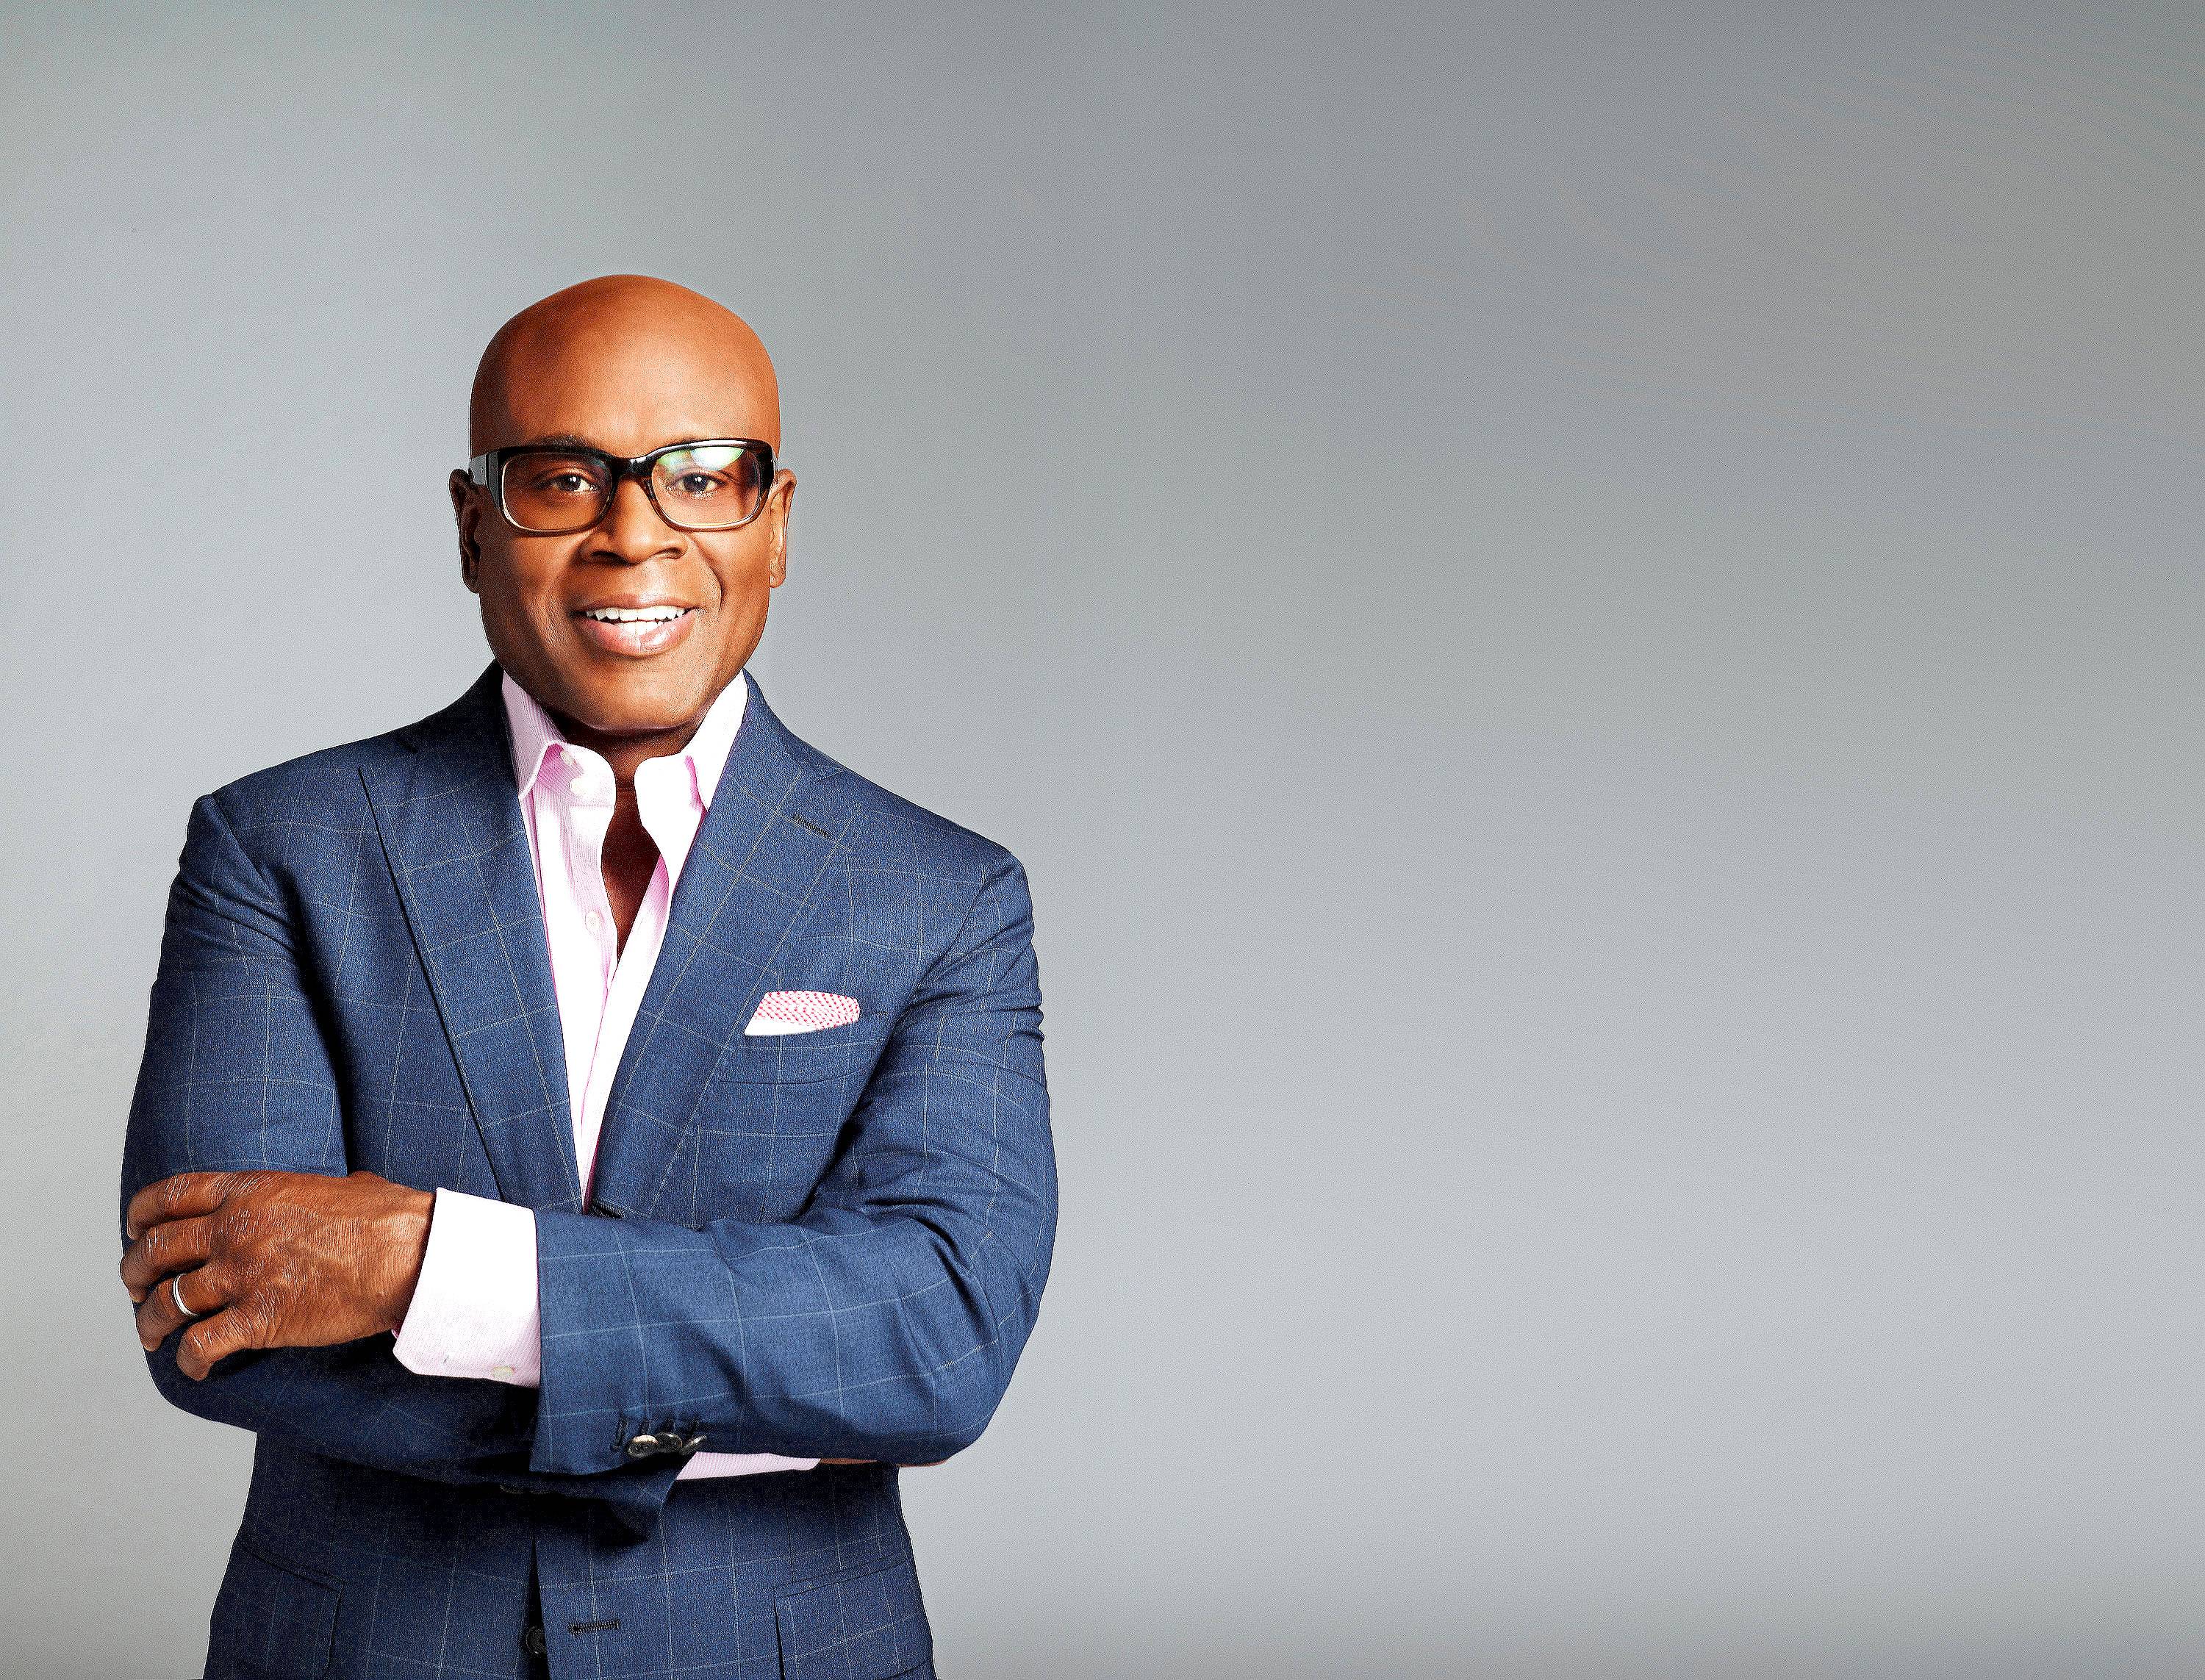 L.A. Reid: Behind the Label - These are just some of the amazing influencers and business men who have pushed the music industry to new heights with their relentless work ethic and drive. (Photo: FOX via Getty Images)